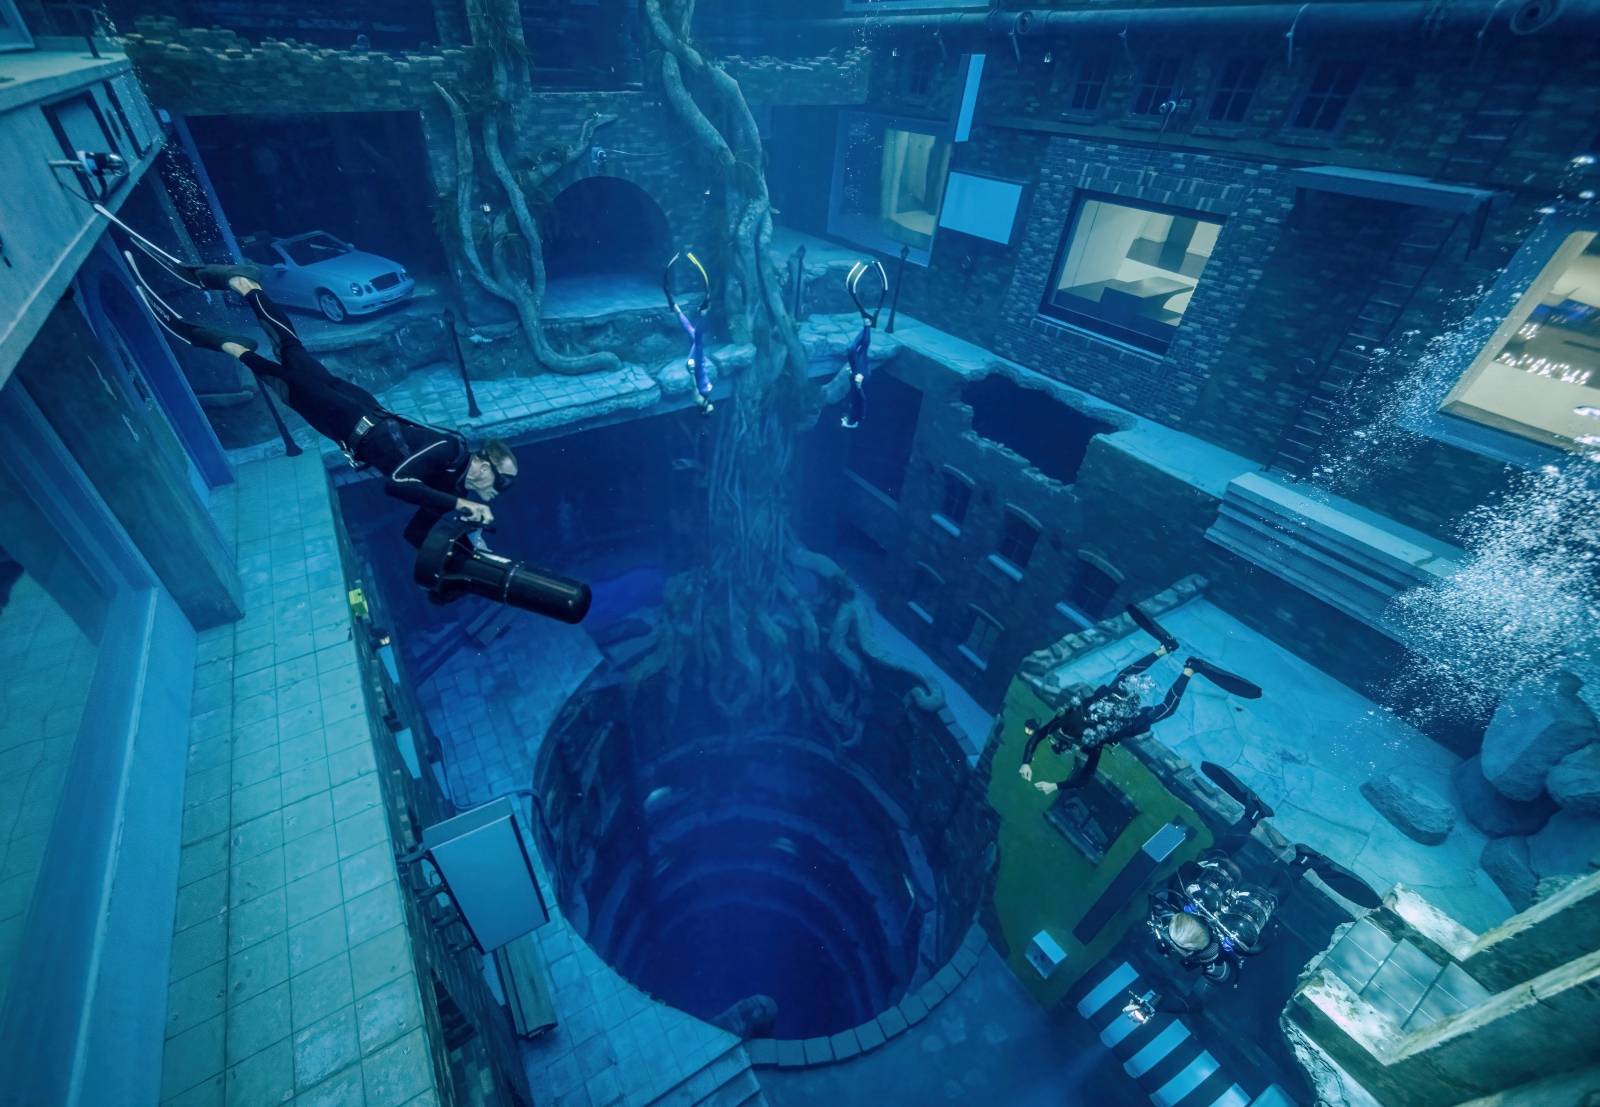 'World's deepest' pool opens at the Deep Dive Dubai